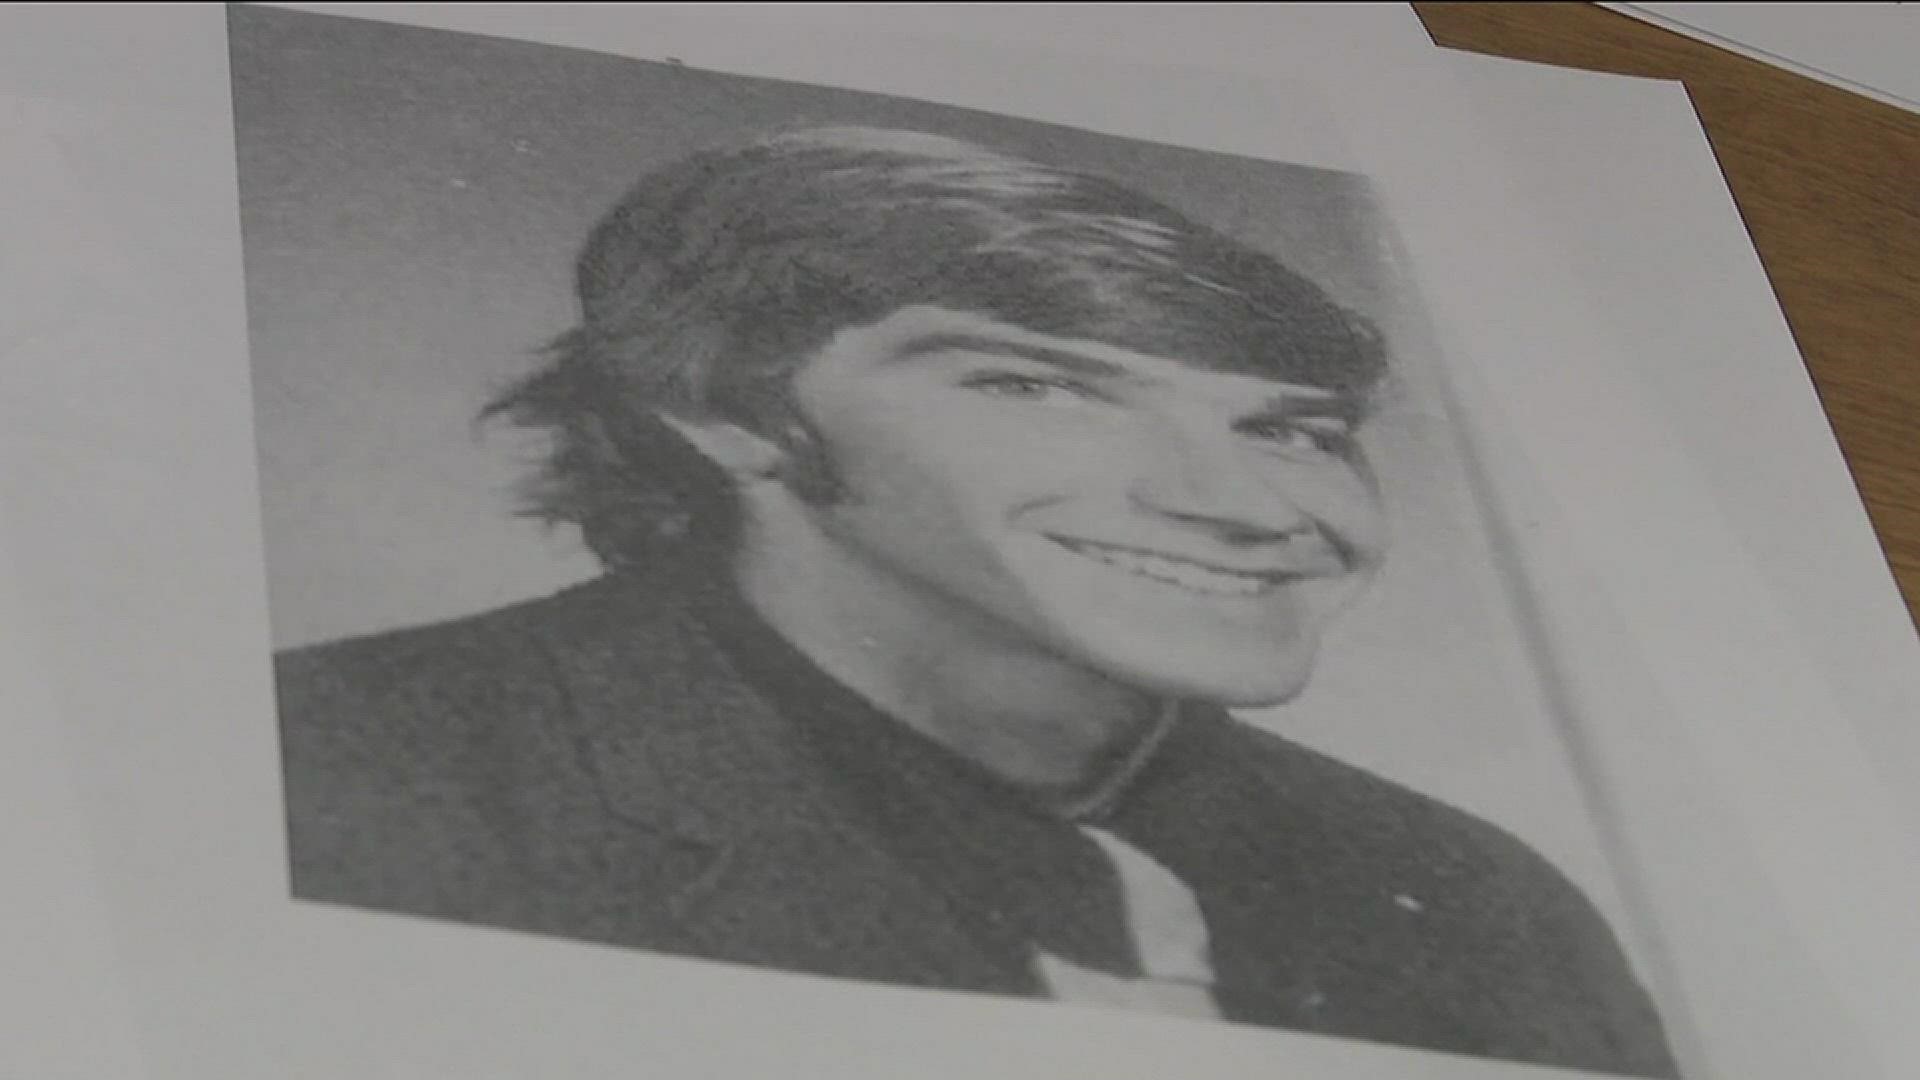 Kyle Clinkscales went missing in 1976 after leaving on his way to school.